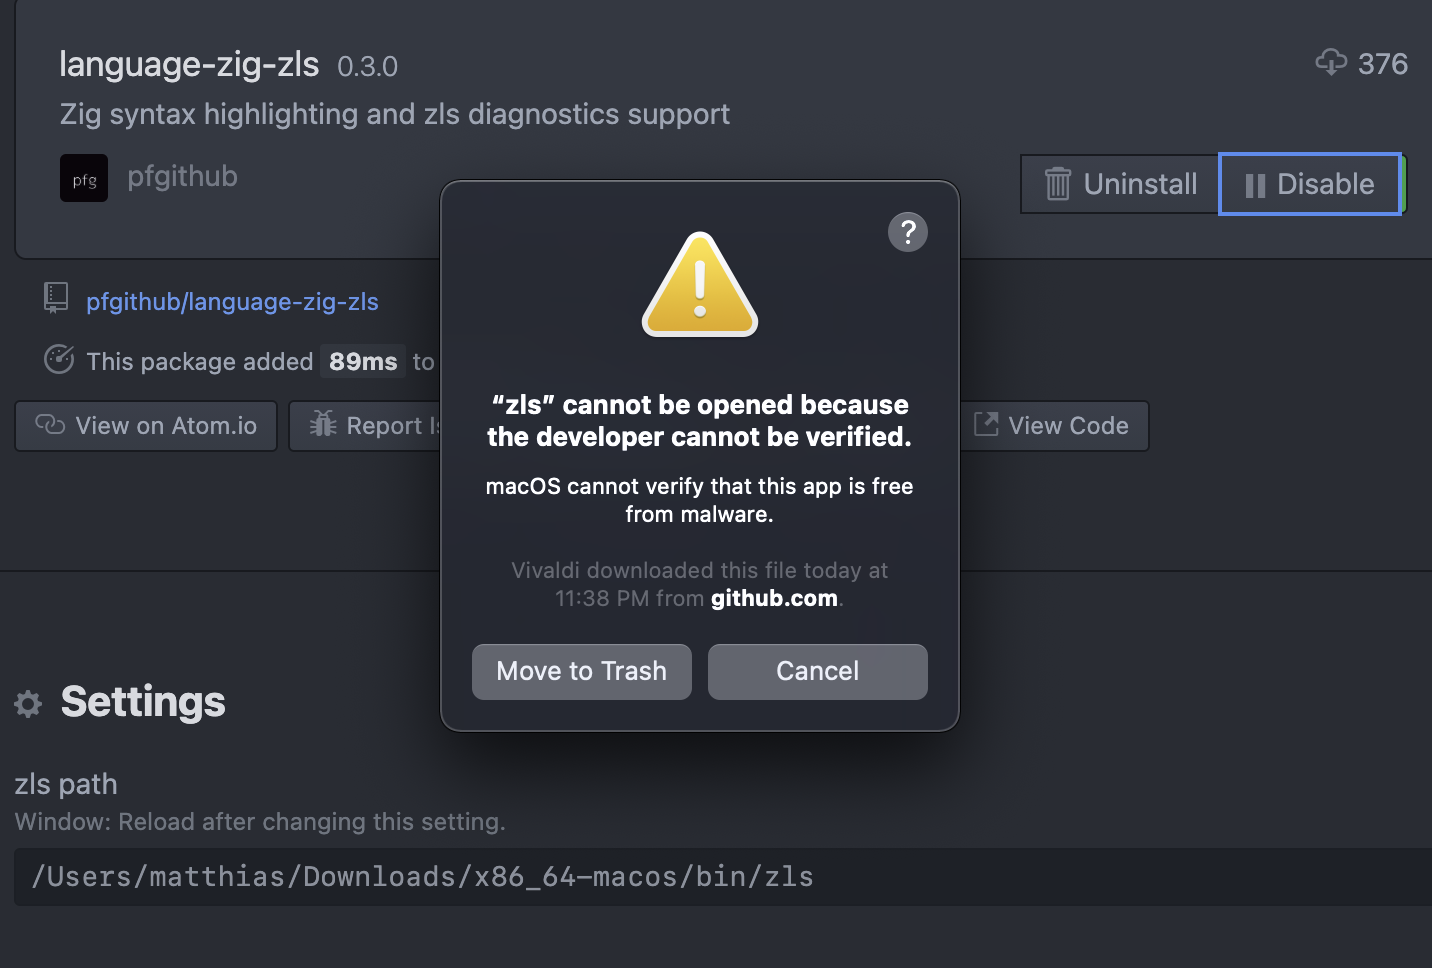 A screenshot of a macOS dialogue saying I don't have permission to execute `zls`. Behind it is Atom, showing the language-zig-zls package ("Zig syntax highlighting and zls diagnostic support"). The setting for "zls path" is in my downloads folder.